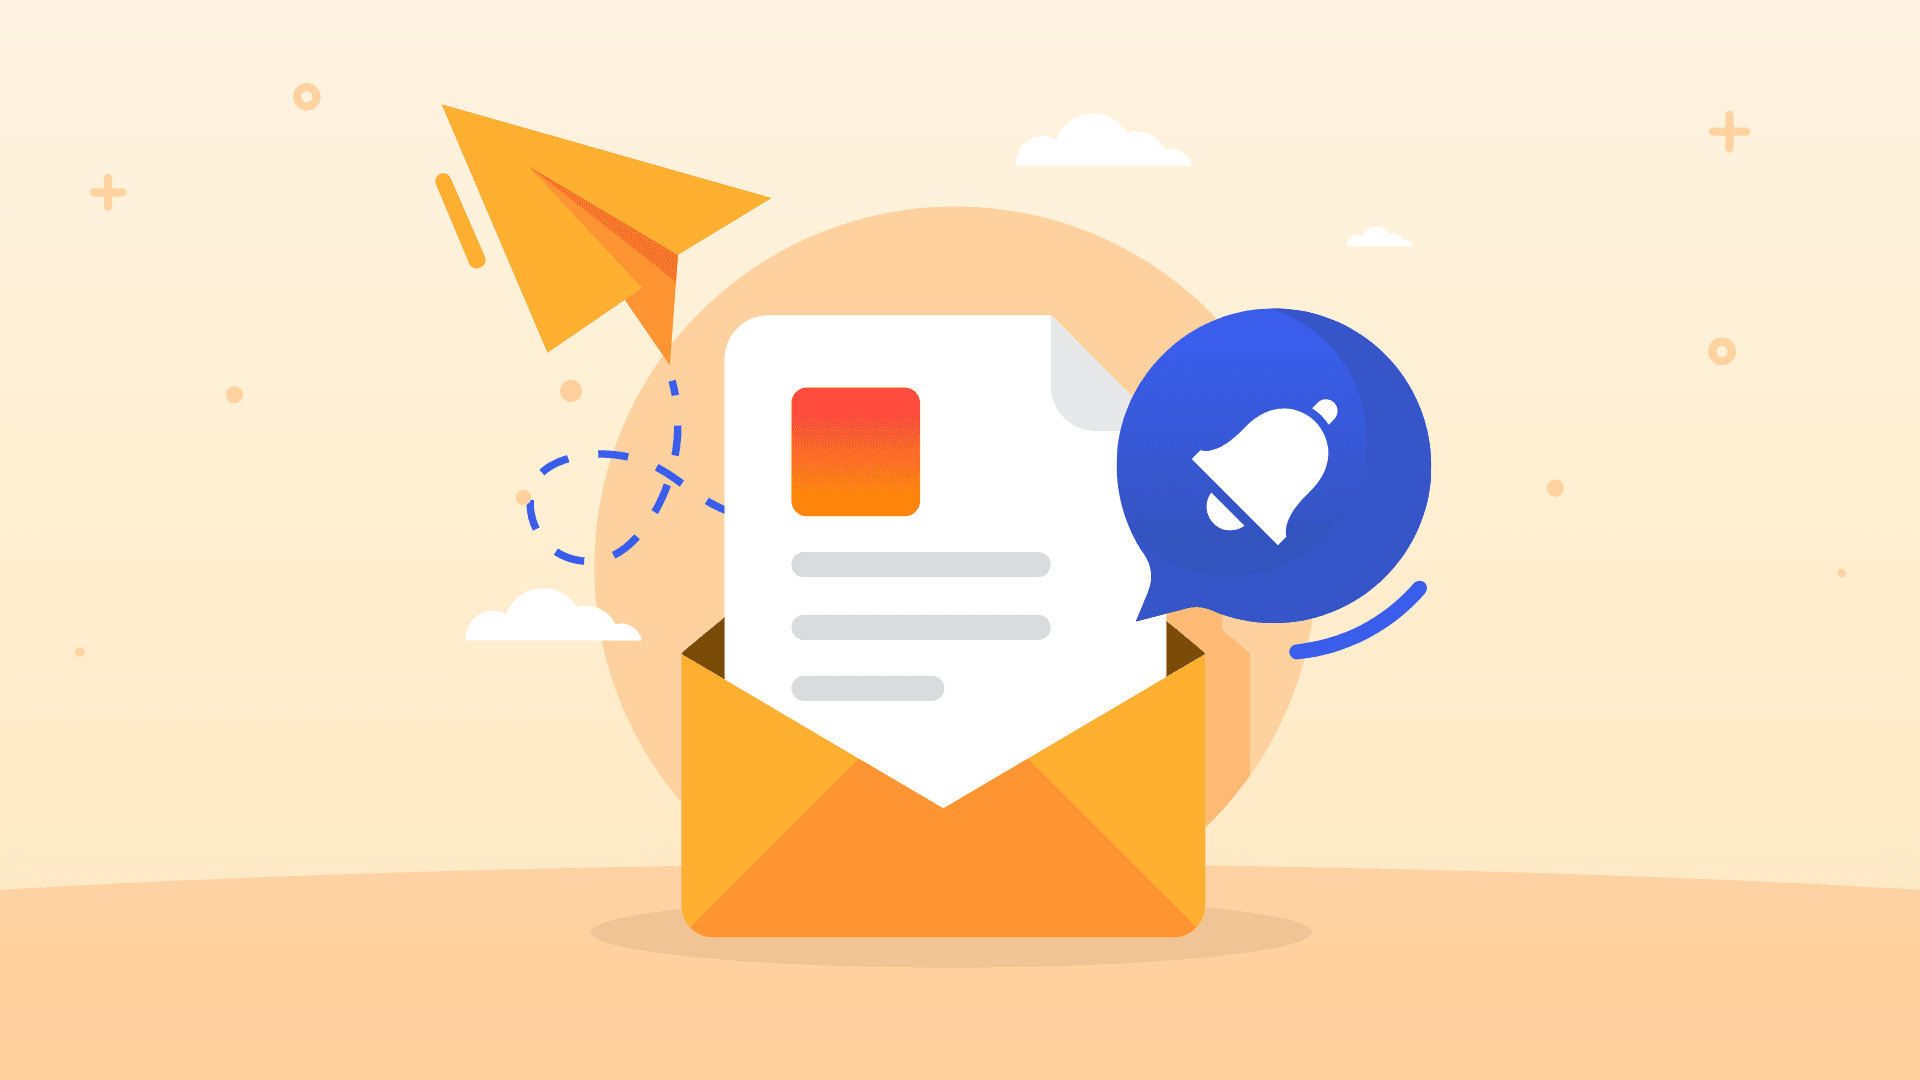 automated-data-collection-email-illustration